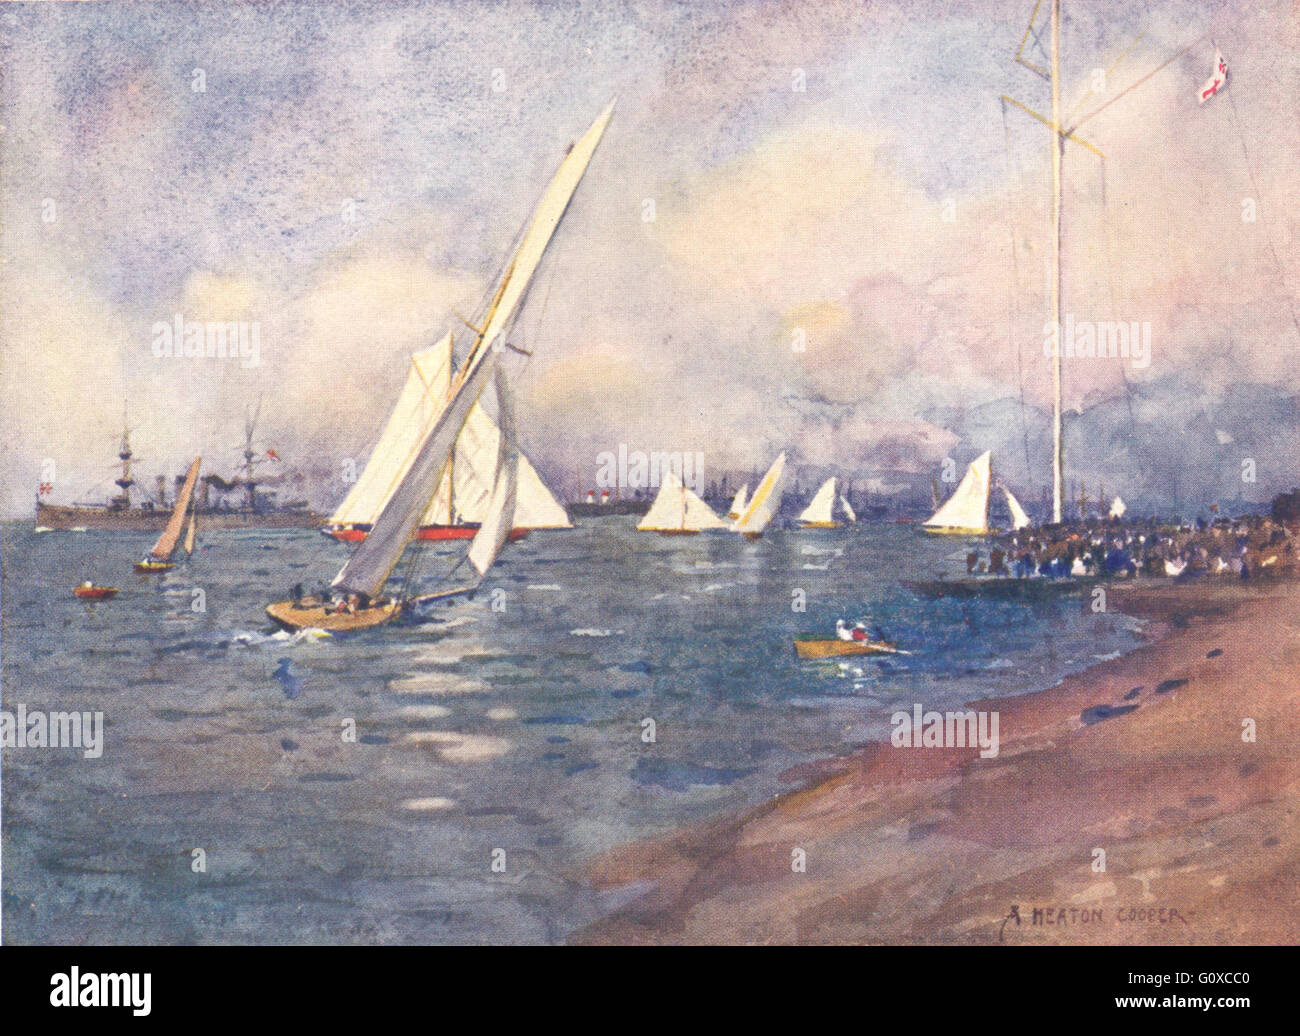 ISLE OF WIGHT : Cowes : Yachting à Cowes, antique print 1908 Banque D'Images